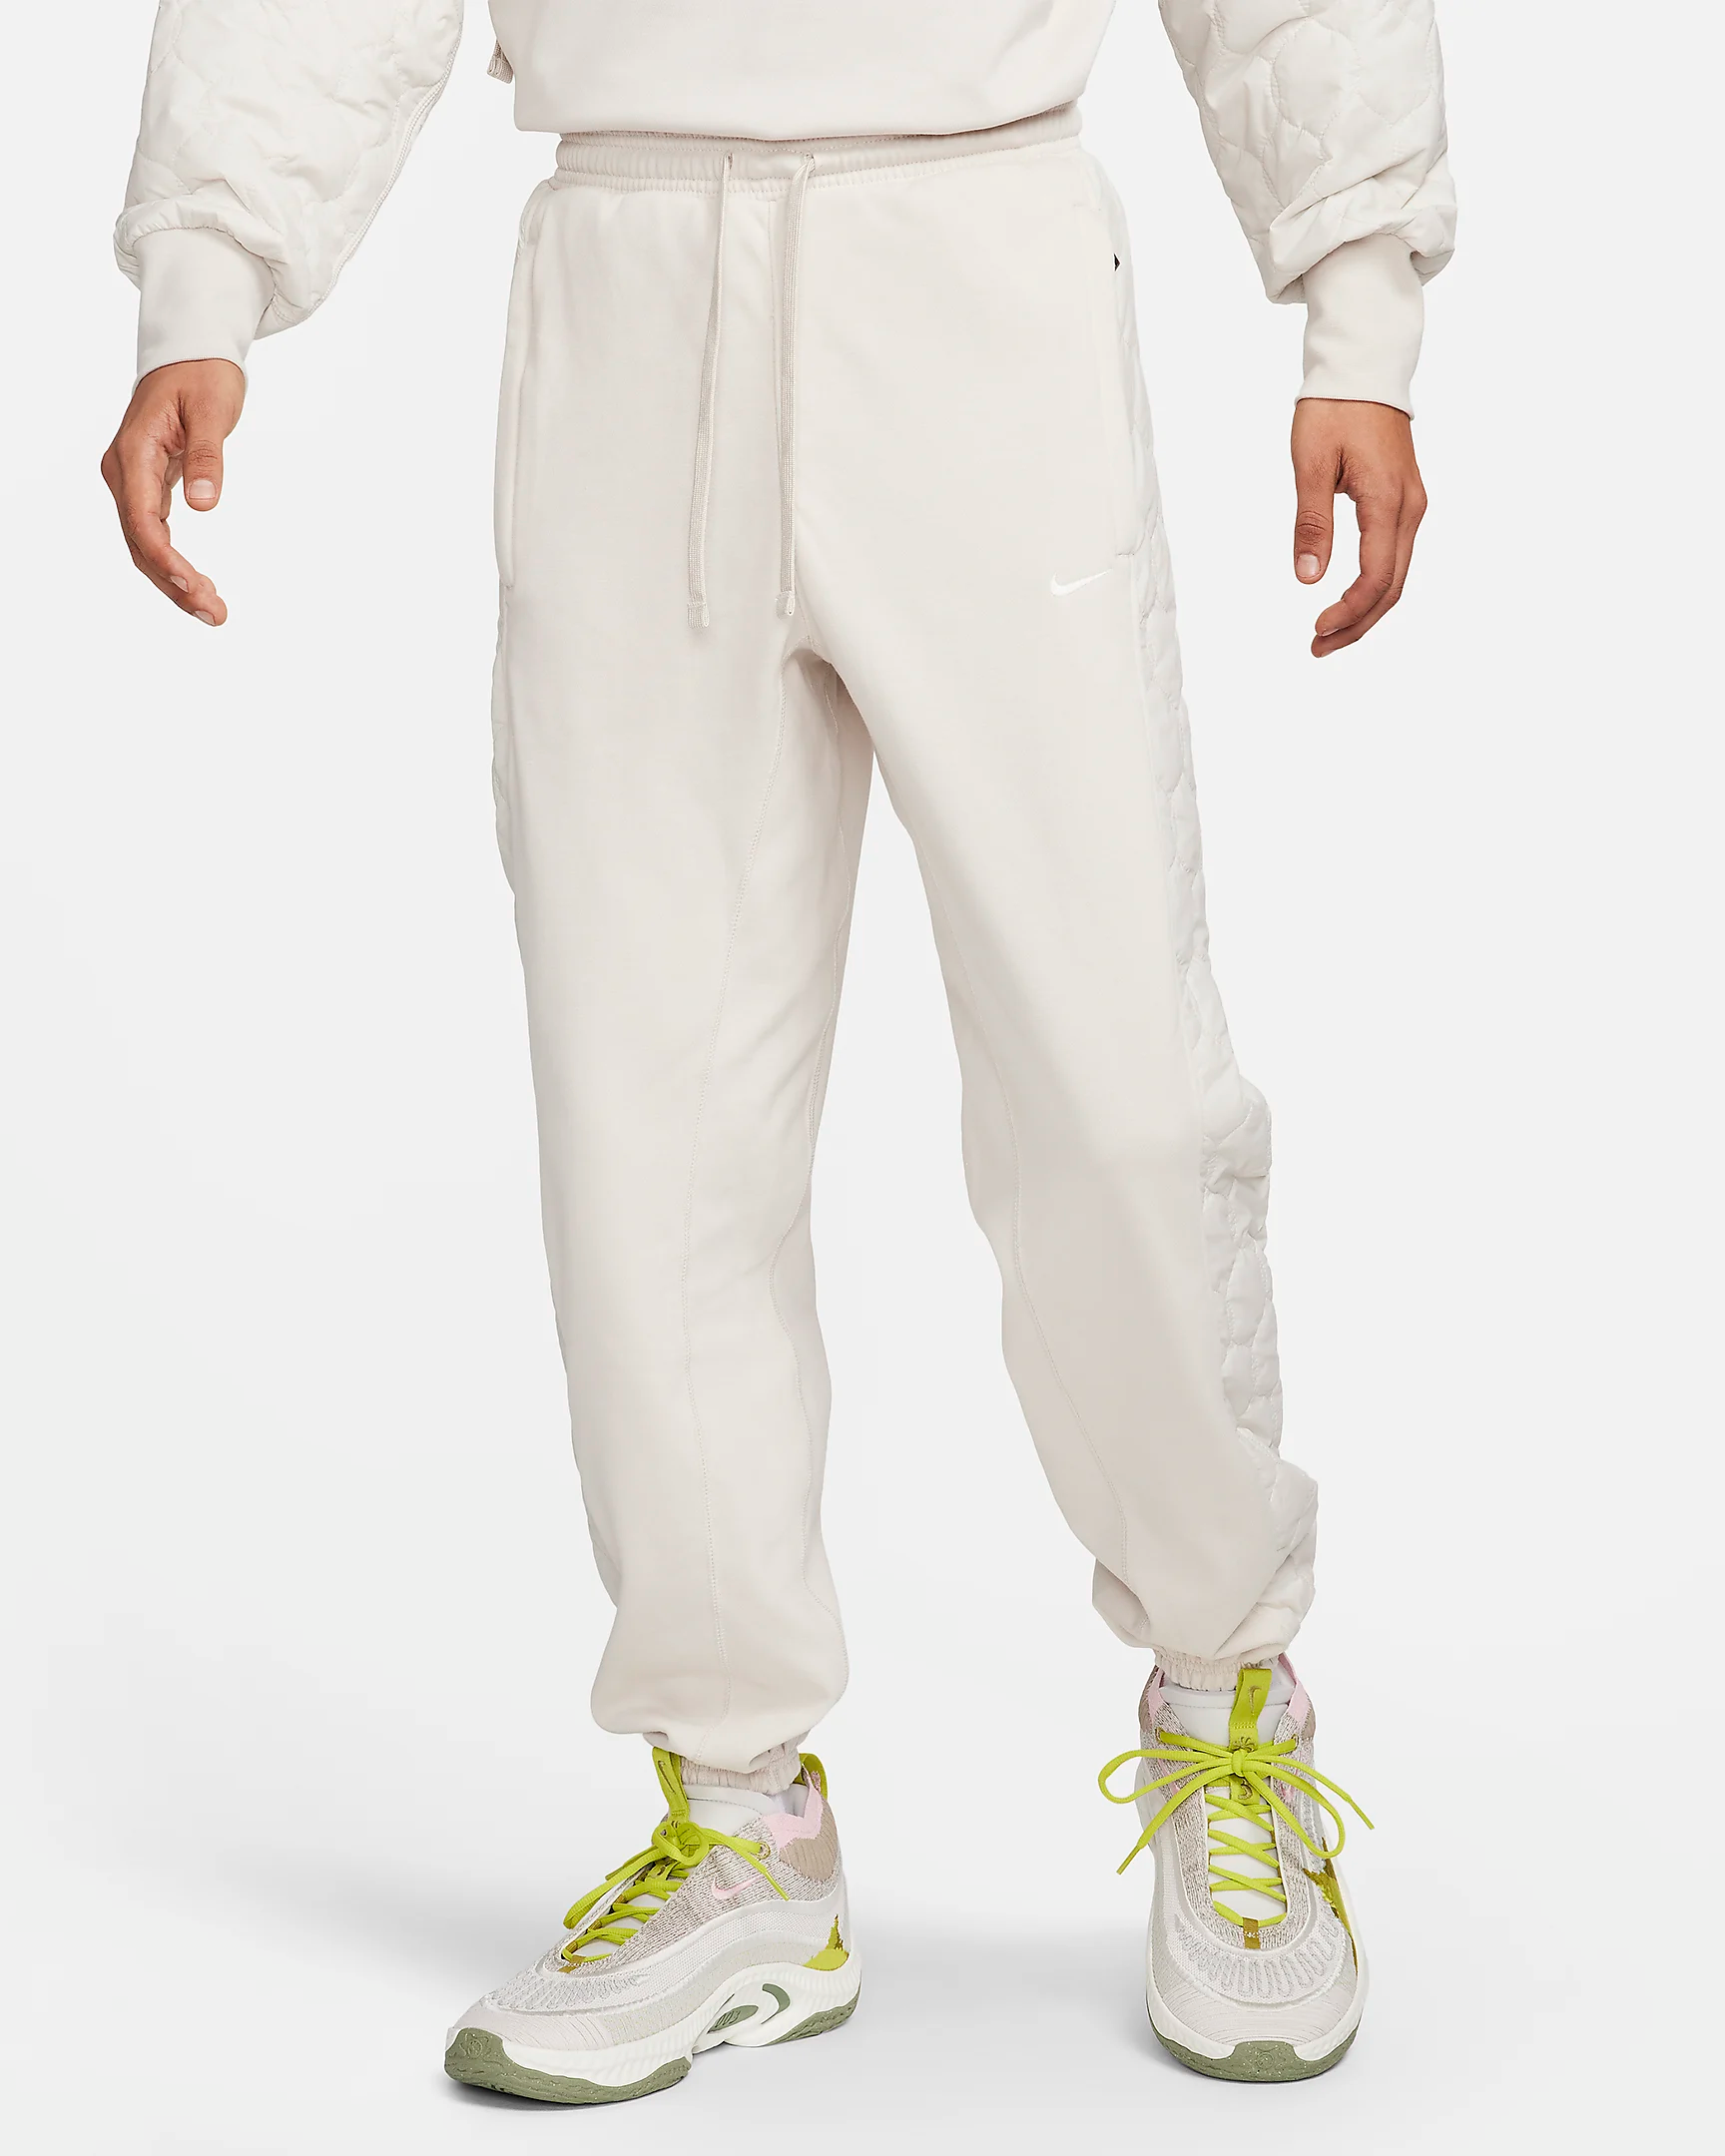 standard-issue-mens-basketball-pants-vPKMnl (1).png